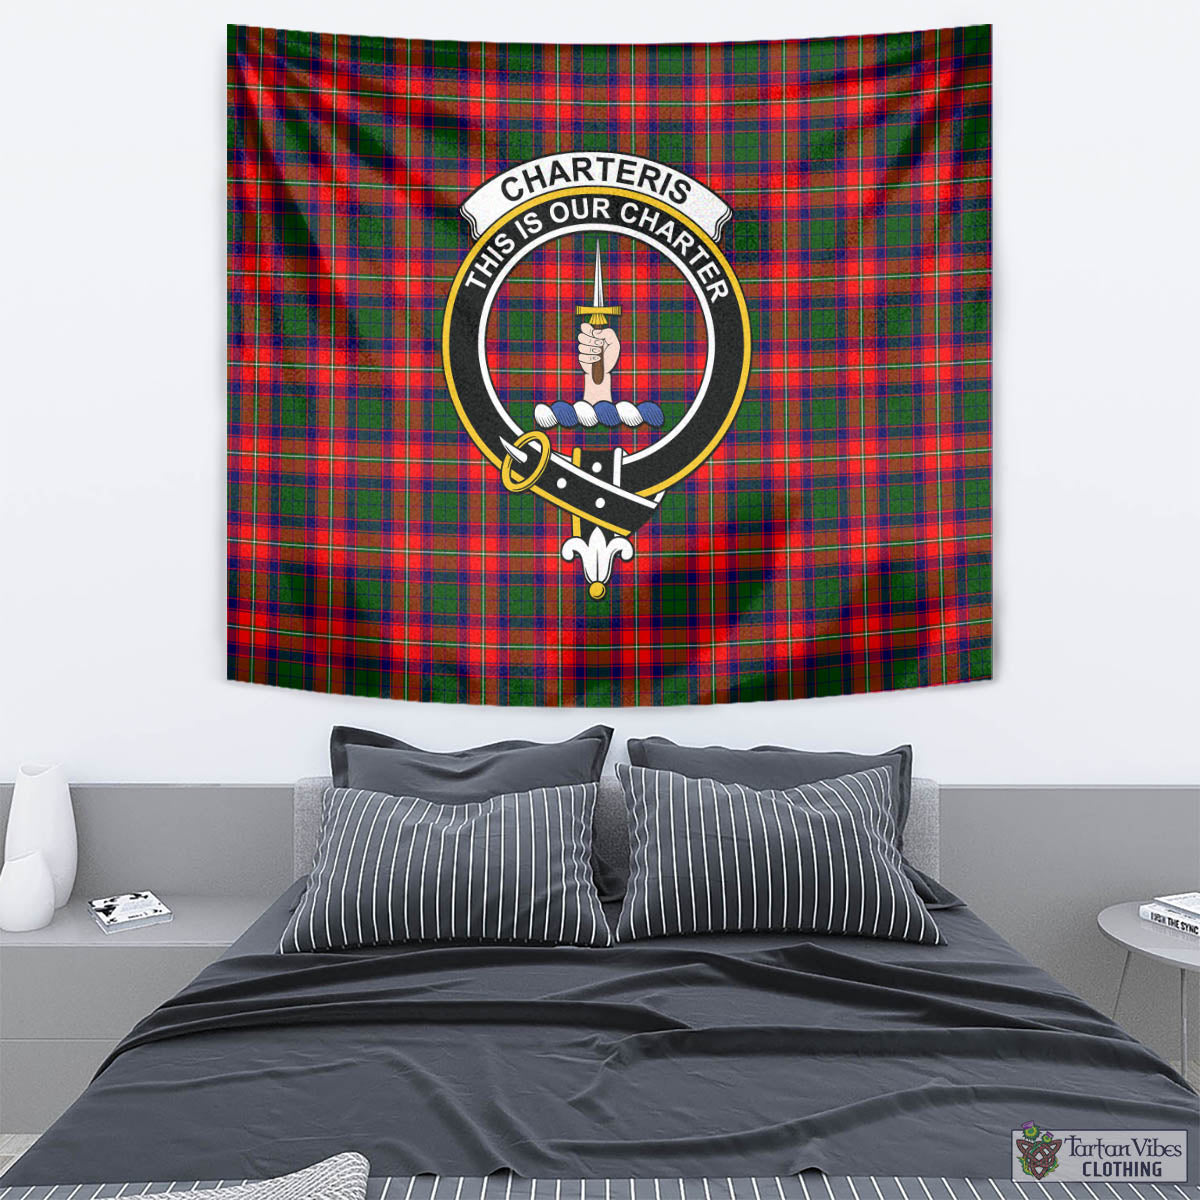 Tartan Vibes Clothing Charteris Tartan Tapestry Wall Hanging and Home Decor for Room with Family Crest